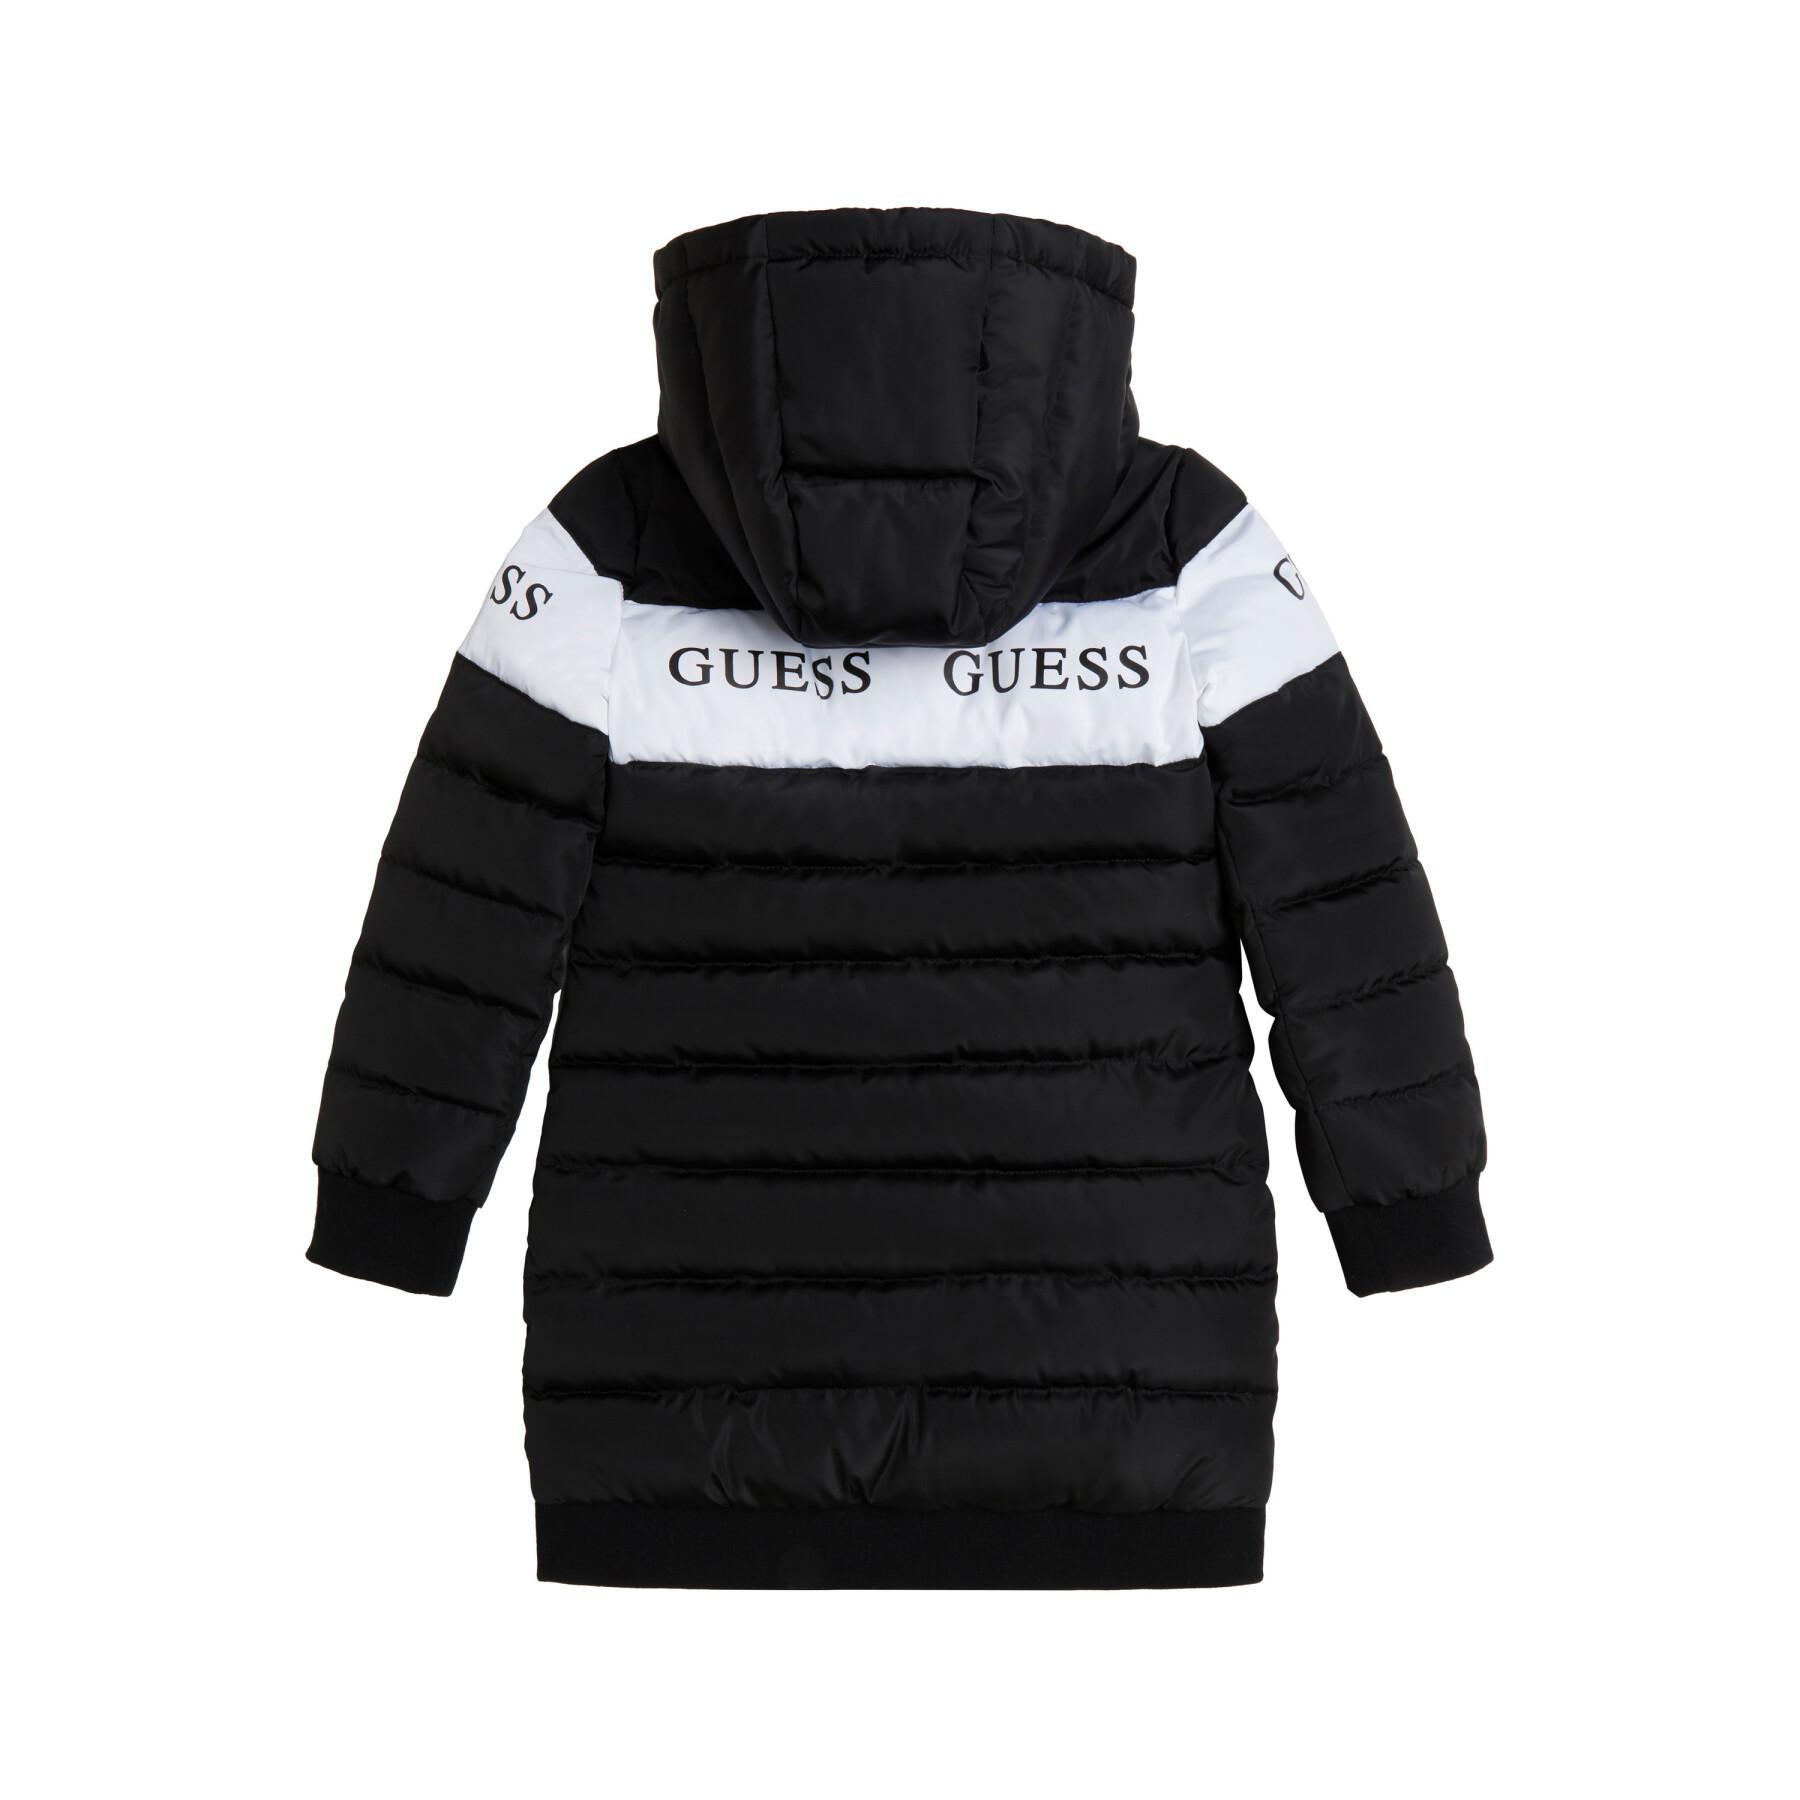 Long hooded jacket for girls Guess